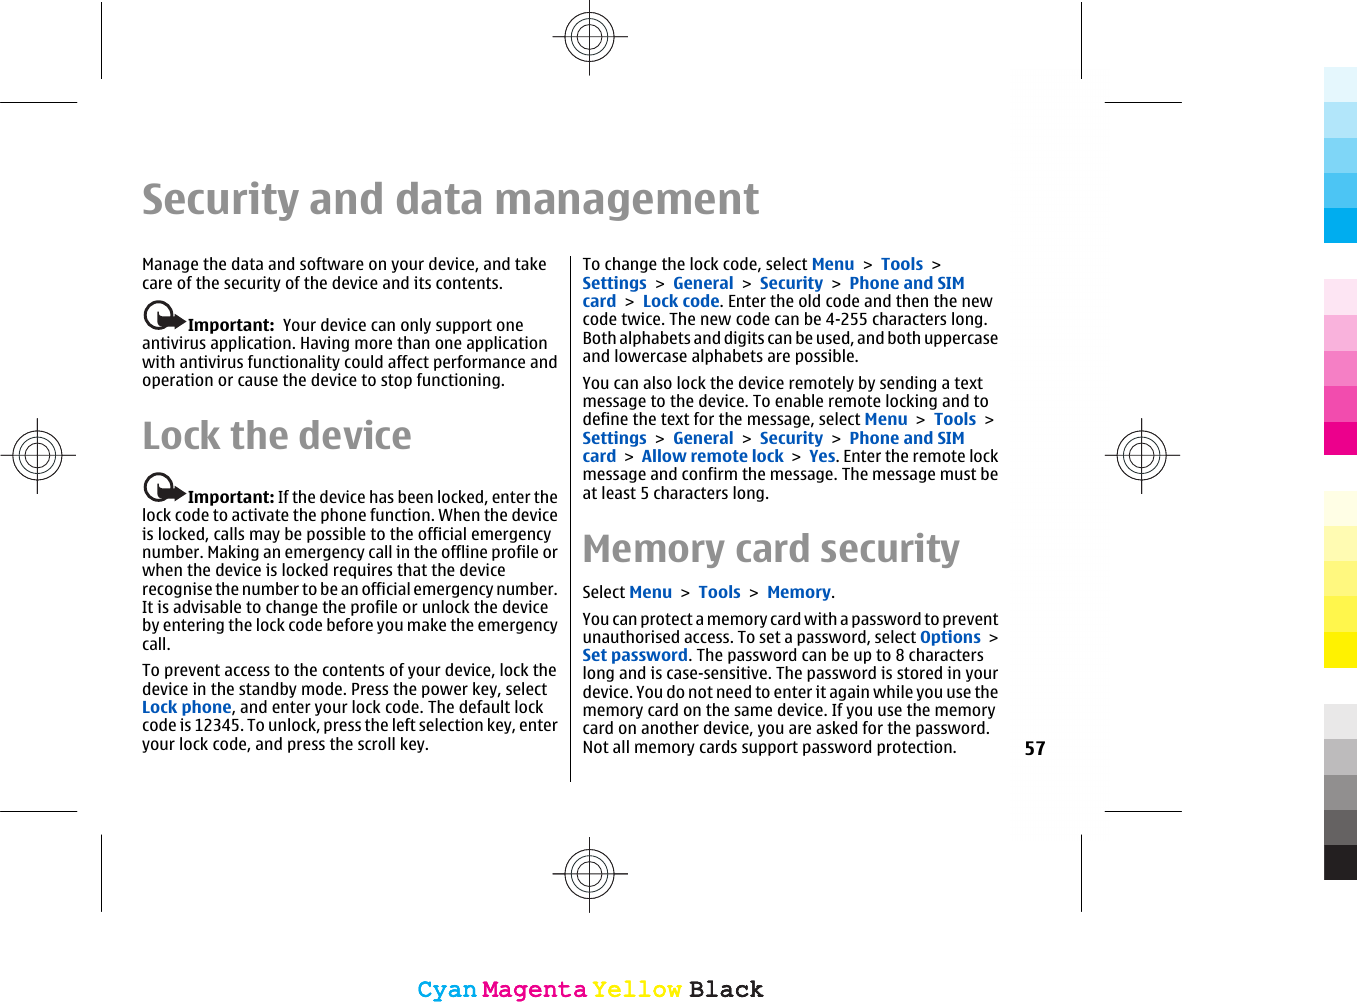 Security and data managementManage the data and software on your device, and takecare of the security of the device and its contents.Important:  Your device can only support oneantivirus application. Having more than one applicationwith antivirus functionality could affect performance andoperation or cause the device to stop functioning.Lock the deviceImportant: If the device has been locked, enter thelock code to activate the phone function. When the deviceis locked, calls may be possible to the official emergencynumber. Making an emergency call in the offline profile orwhen the device is locked requires that the devicerecognise the number to be an official emergency number.It is advisable to change the profile or unlock the deviceby entering the lock code before you make the emergencycall.To prevent access to the contents of your device, lock thedevice in the standby mode. Press the power key, selectLock phone, and enter your lock code. The default lockcode is 12345. To unlock, press the left selection key, enteryour lock code, and press the scroll key.To change the lock code, select Menu &gt; Tools &gt;Settings &gt; General &gt; Security &gt; Phone and SIMcard &gt; Lock code. Enter the old code and then the newcode twice. The new code can be 4-255 characters long.Both alphabets and digits can be used, and both uppercaseand lowercase alphabets are possible.You can also lock the device remotely by sending a textmessage to the device. To enable remote locking and todefine the text for the message, select Menu &gt; Tools &gt;Settings &gt; General &gt; Security &gt; Phone and SIMcard &gt; Allow remote lock &gt; Yes. Enter the remote lockmessage and confirm the message. The message must beat least 5 characters long.Memory card securitySelect Menu &gt; Tools &gt; Memory.You can protect a memory card with a password to preventunauthorised access. To set a password, select Options &gt;Set password. The password can be up to 8 characterslong and is case-sensitive. The password is stored in yourdevice. You do not need to enter it again while you use thememory card on the same device. If you use the memorycard on another device, you are asked for the password.Not all memory cards support password protection. 57CyanCyanMagentaMagentaYellowYellowBlackBlackCyanCyanMagentaMagentaYellowYellowBlackBlack